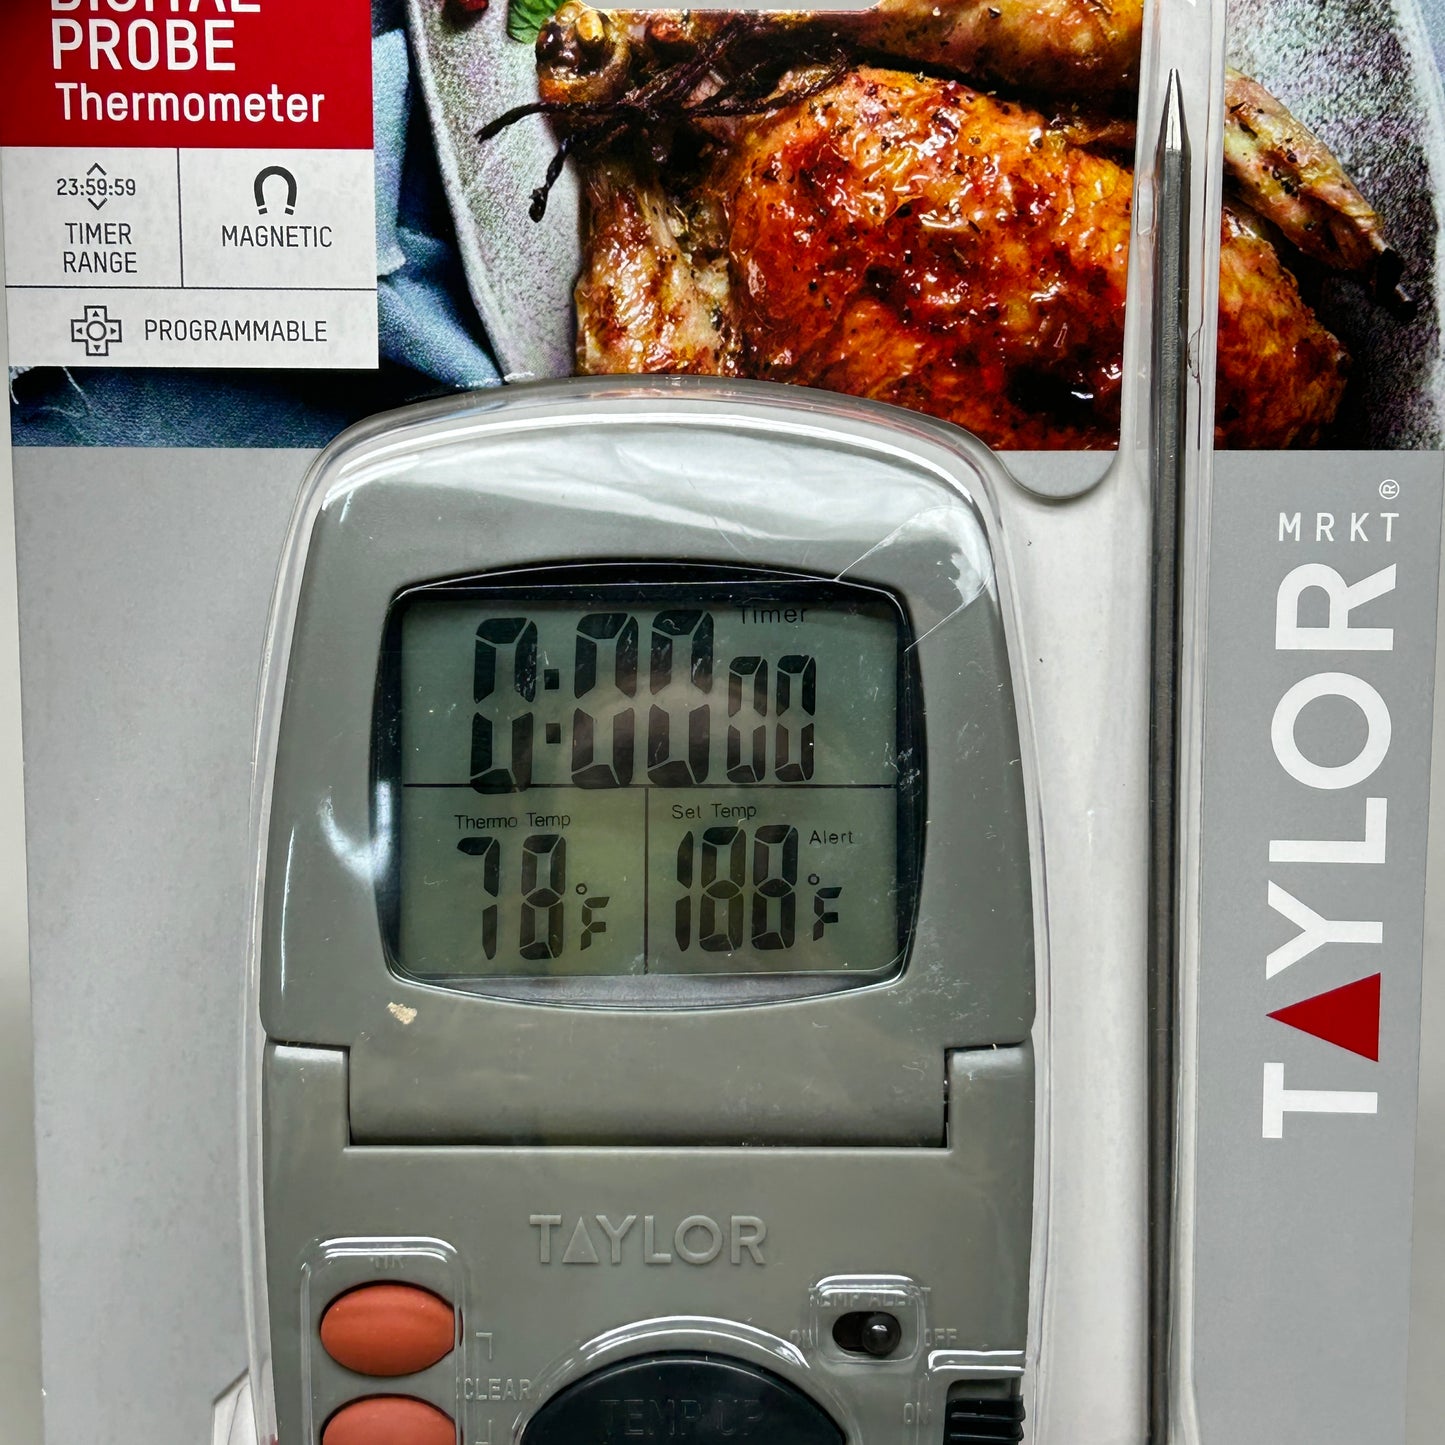 TAYLOR Digital Wired Probe Thermometer 1470N (New)